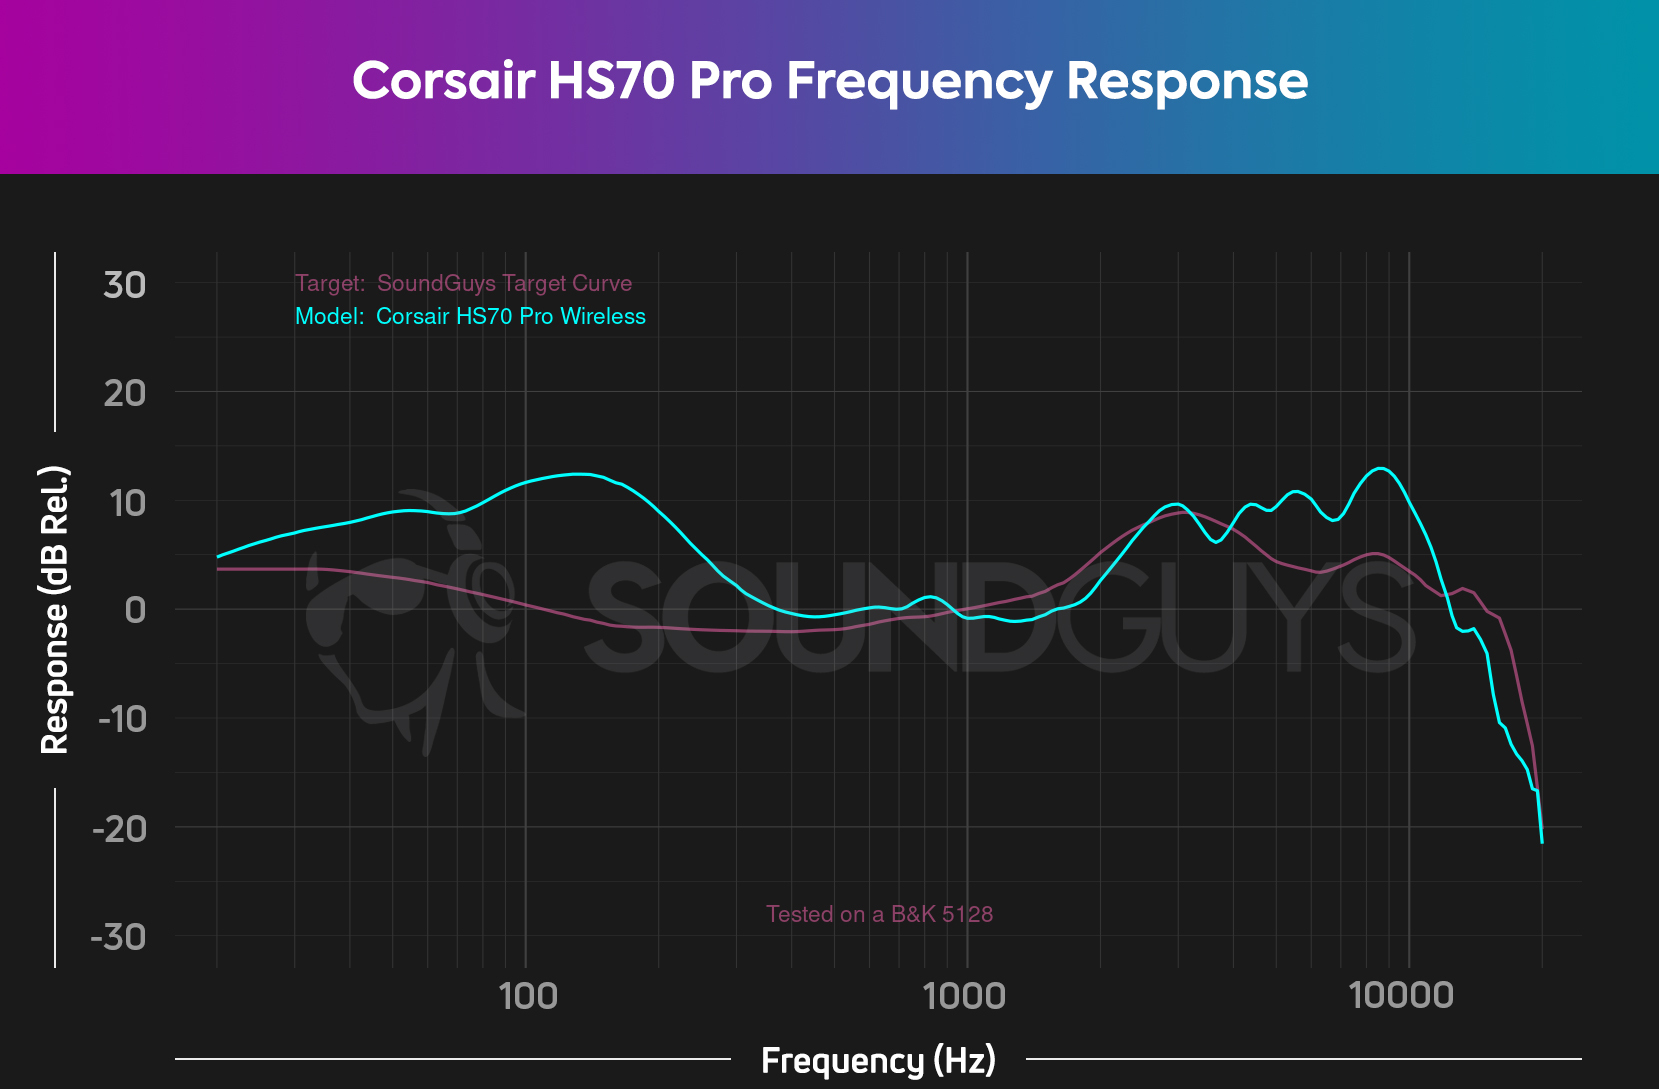 The Corsair HS70 Pro Wireless frequency response chart showing an exaggerated bass and high end response.